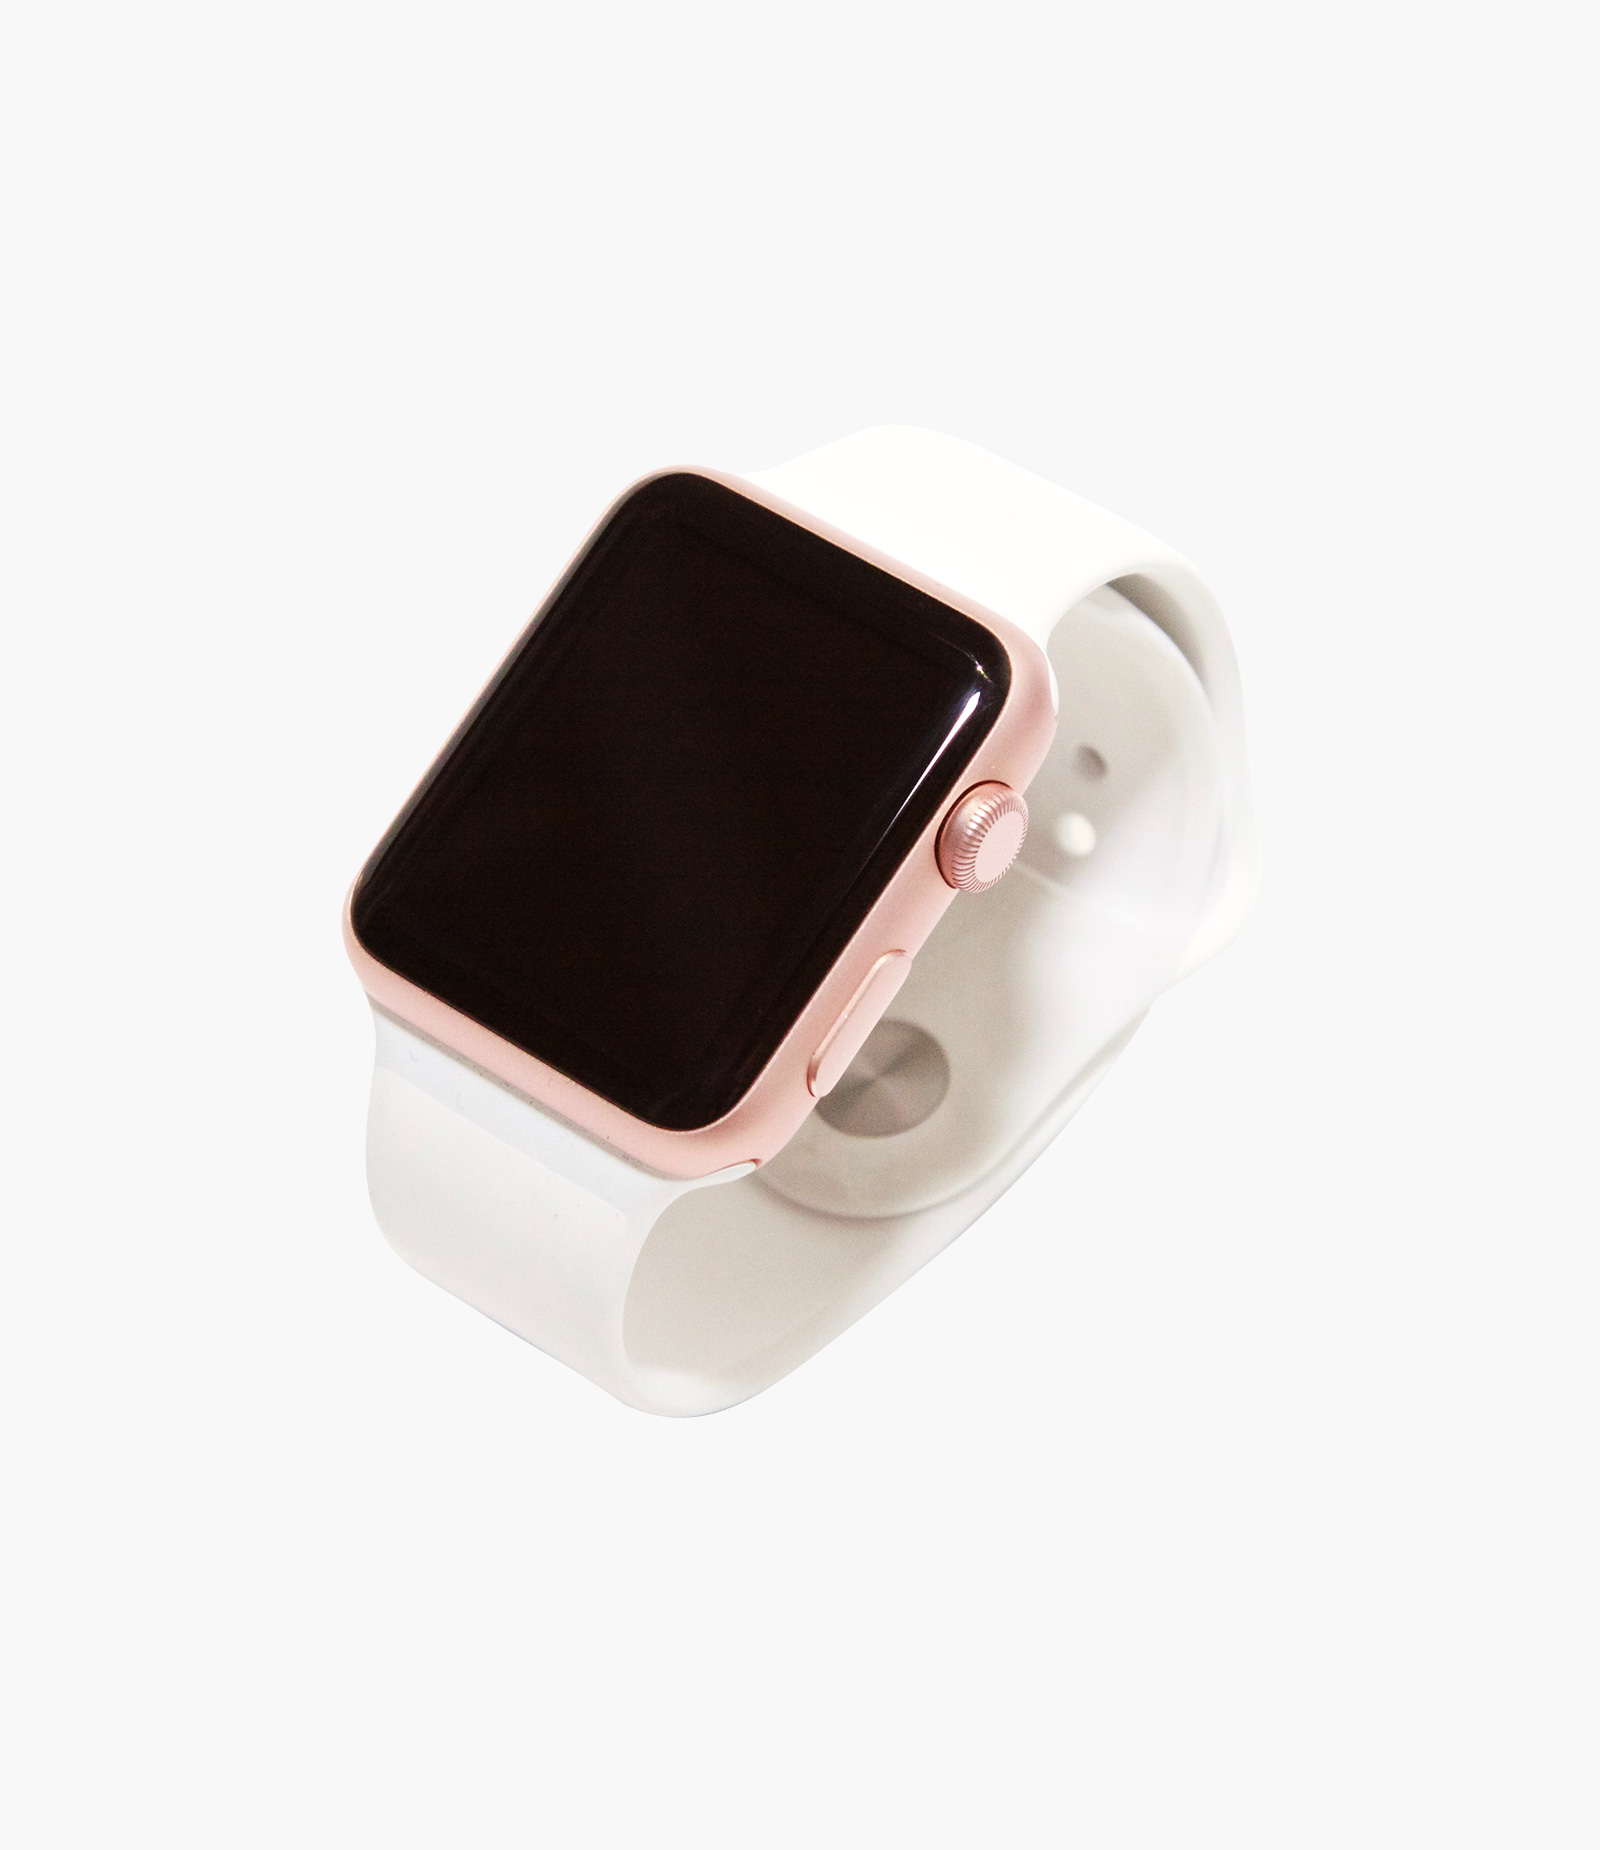 Apple Watch Series 2 Rosegold Aluminum Case with White Sport Band